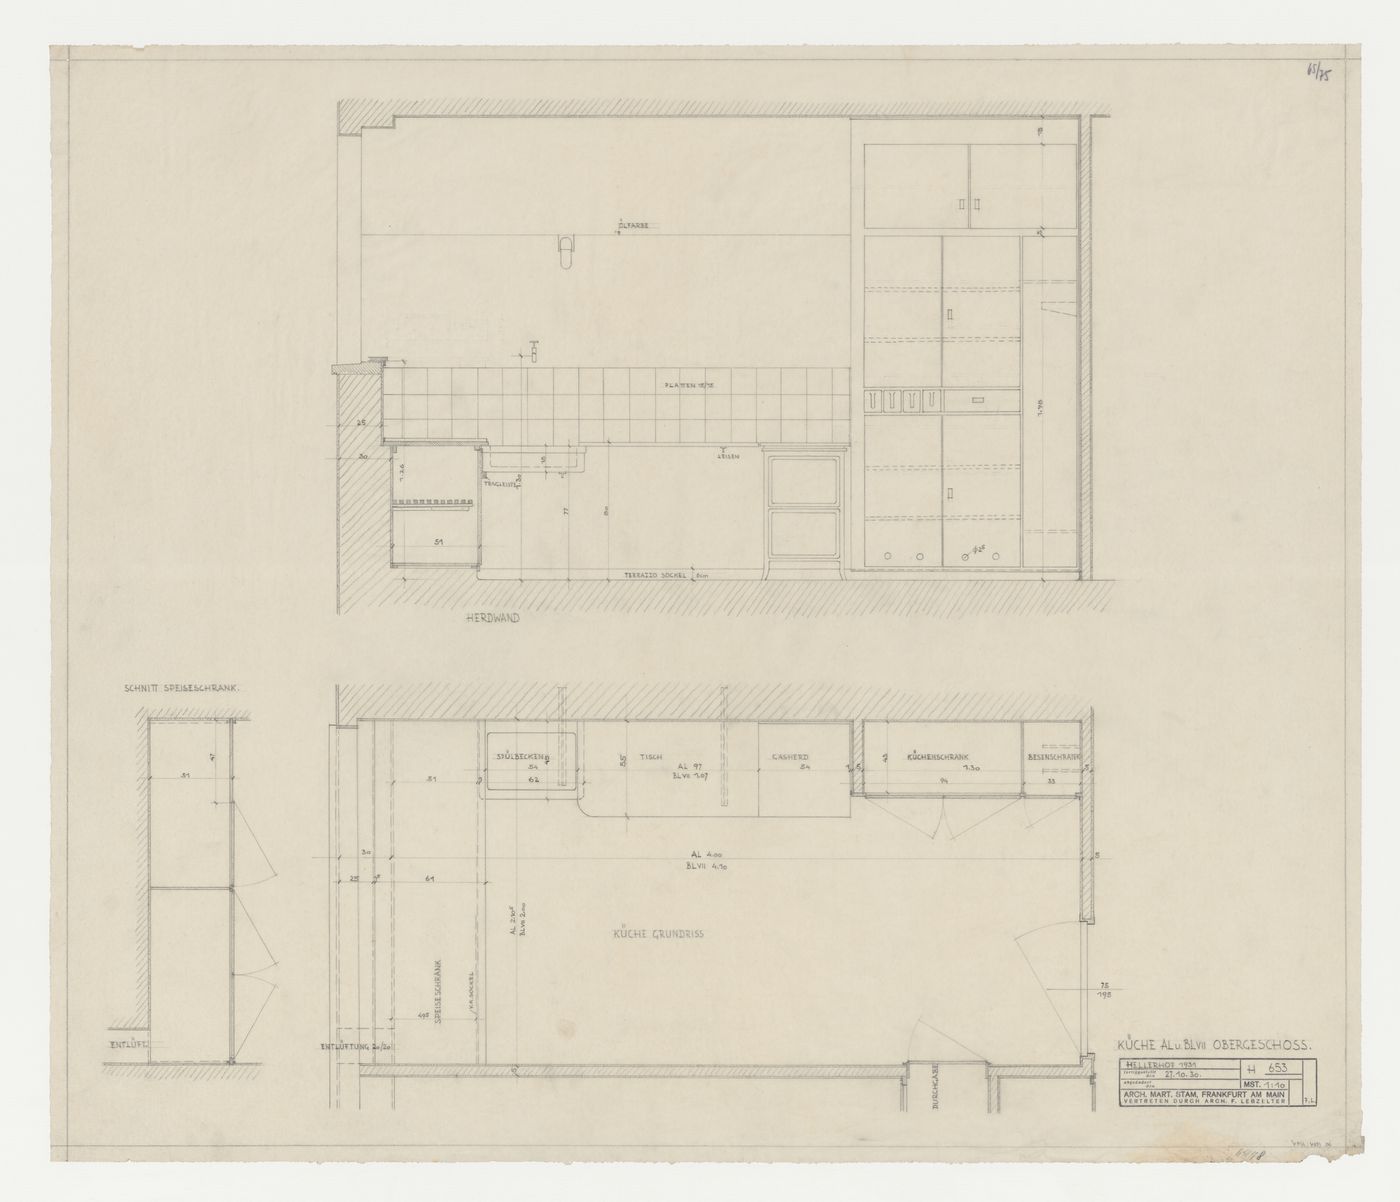 First floor plan, elevation, and section for type AL and type BL kitchens for housing units, Hellerhof Housing Estate, Frankfurt am Main, Germany